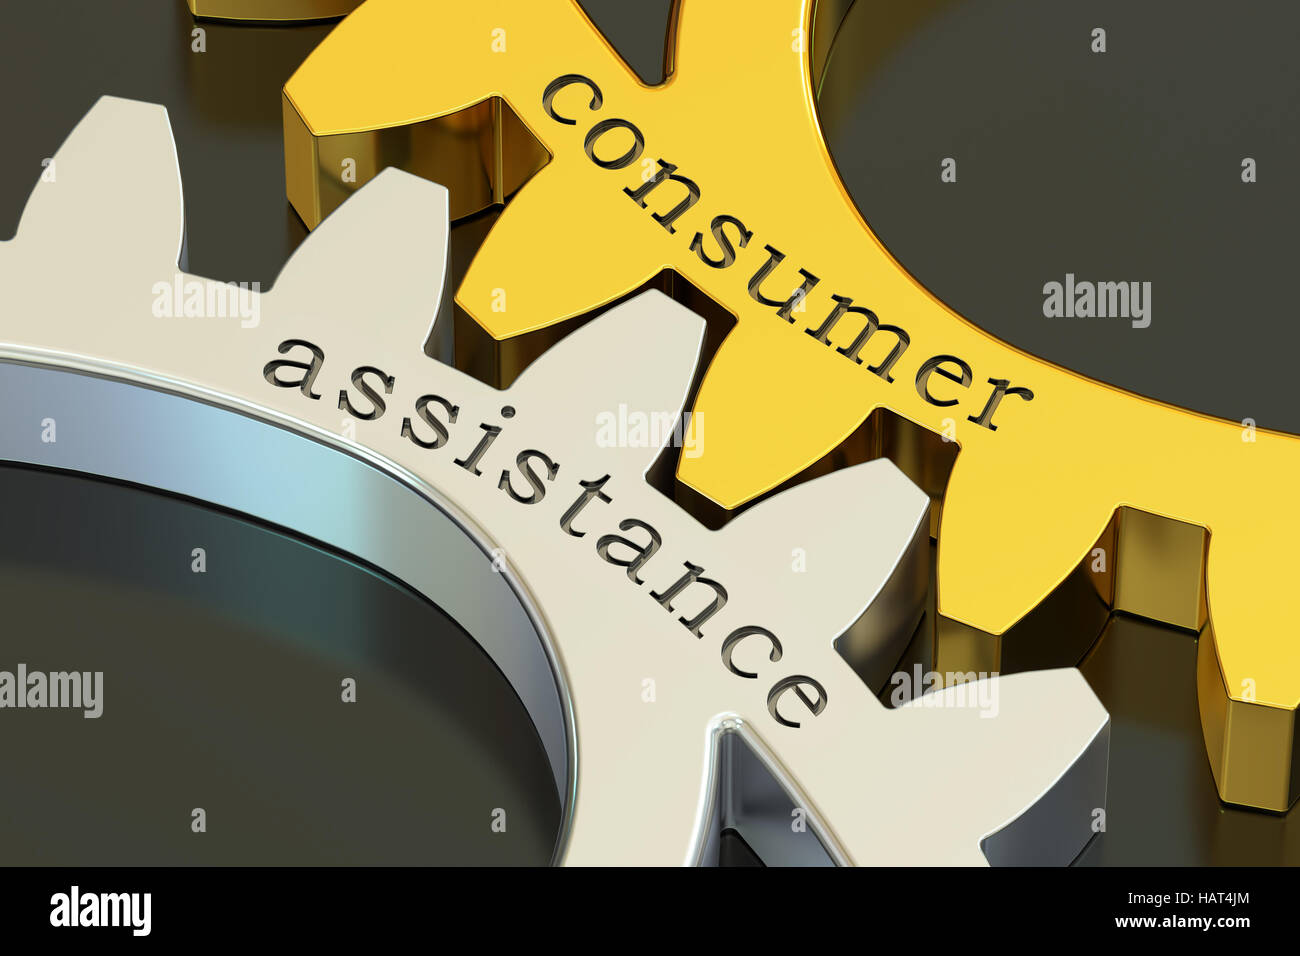 Consumer Assistance concept on the gearwheels, 3D rendering Stock Photo